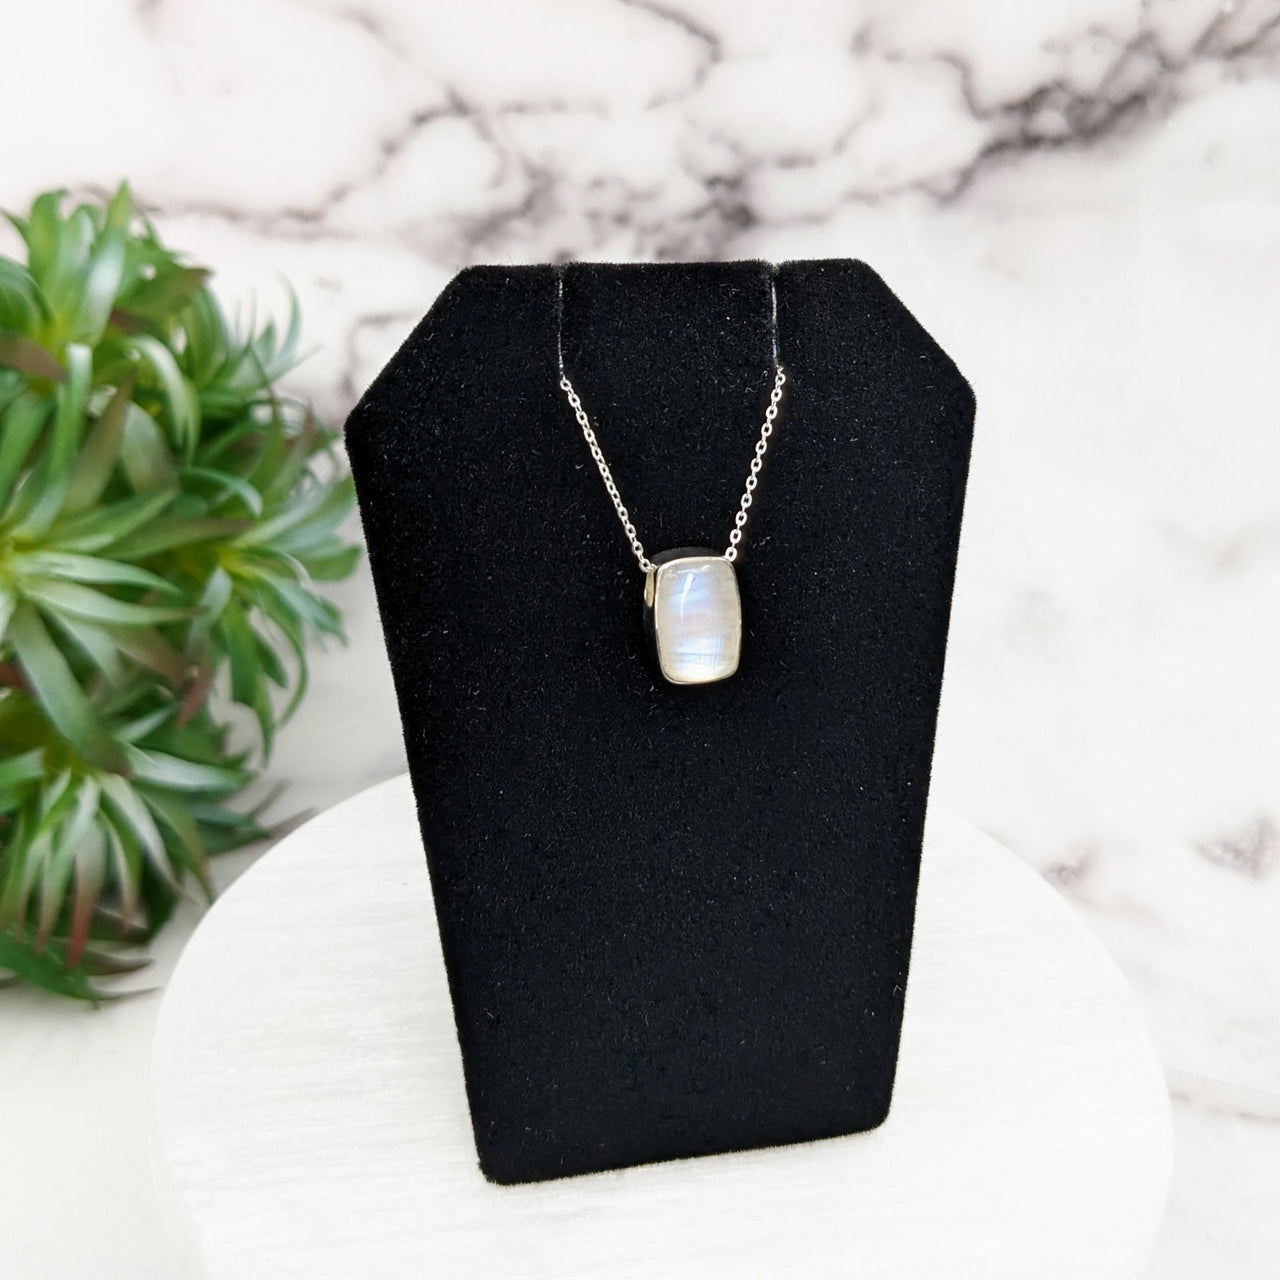 Rainbow Moonstone Polished Necklace Sterling Silver Slider Pendant on 18" Chain #LV3258